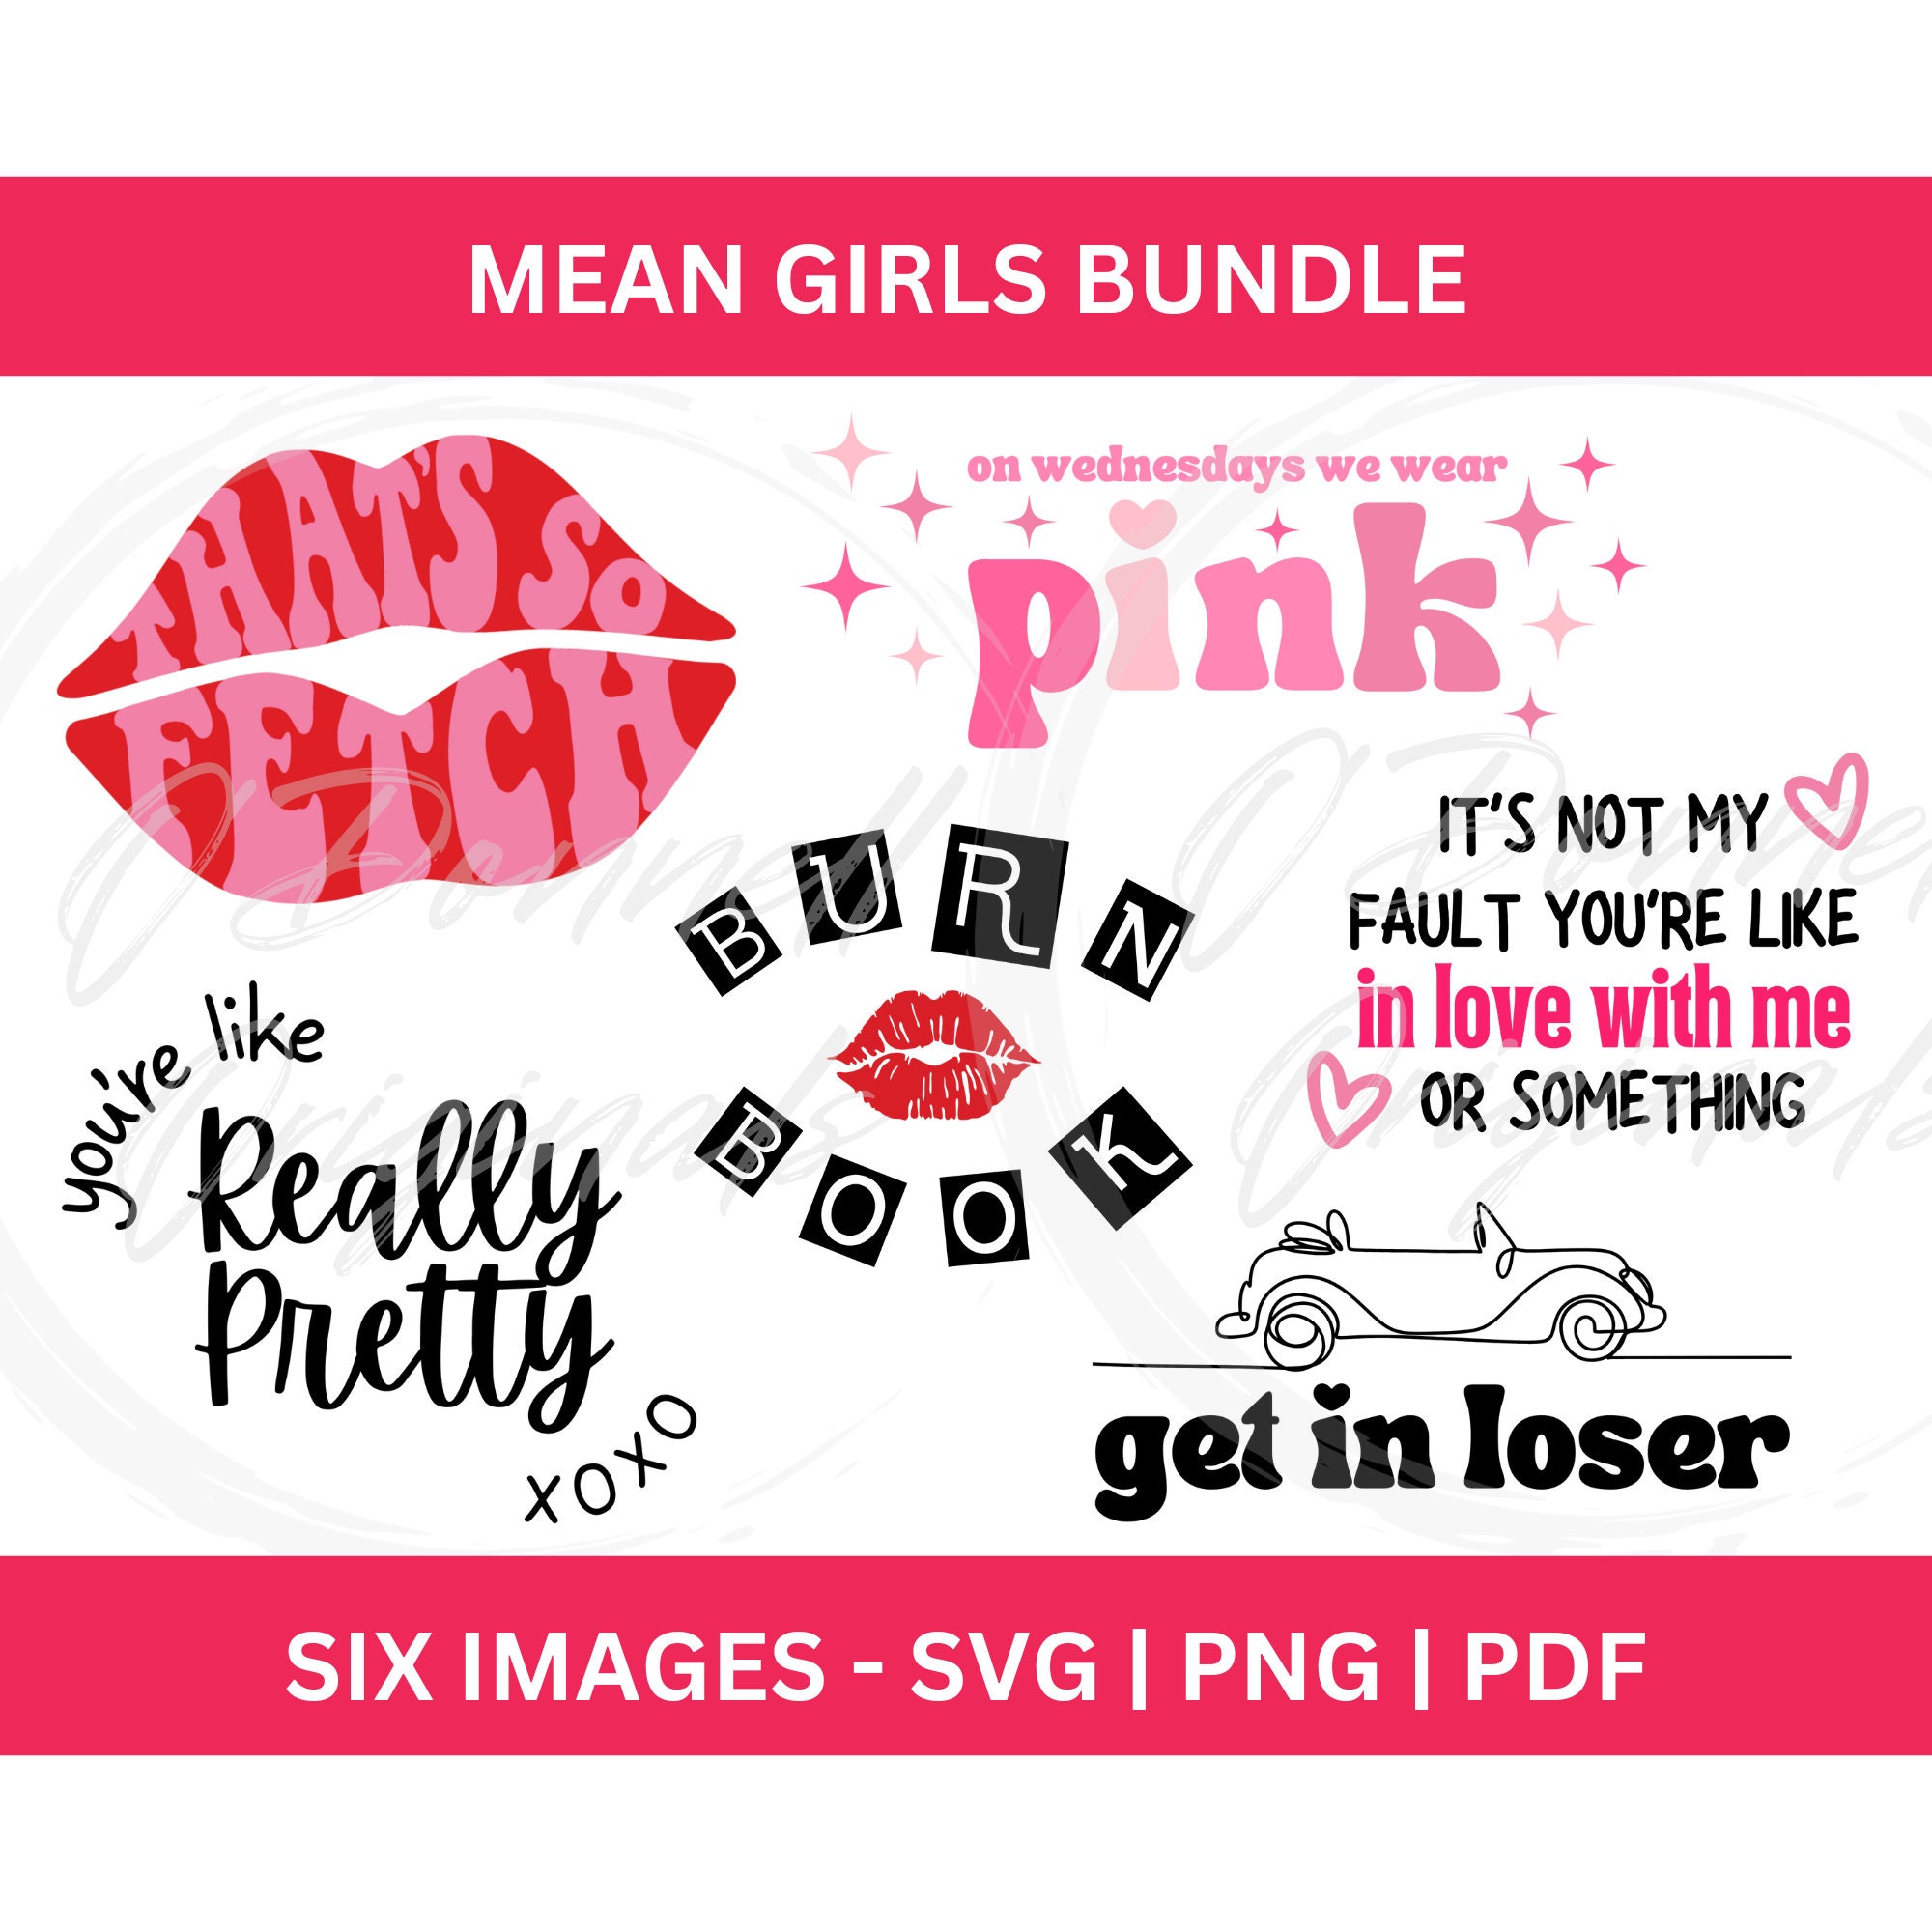 Mean Girls Mini Pack / Mean Girls Stickers / Burn Book / October 3rd / So  Fetch / Mean Girls Party / You Go Glen Coco / Jingle Bell Rock